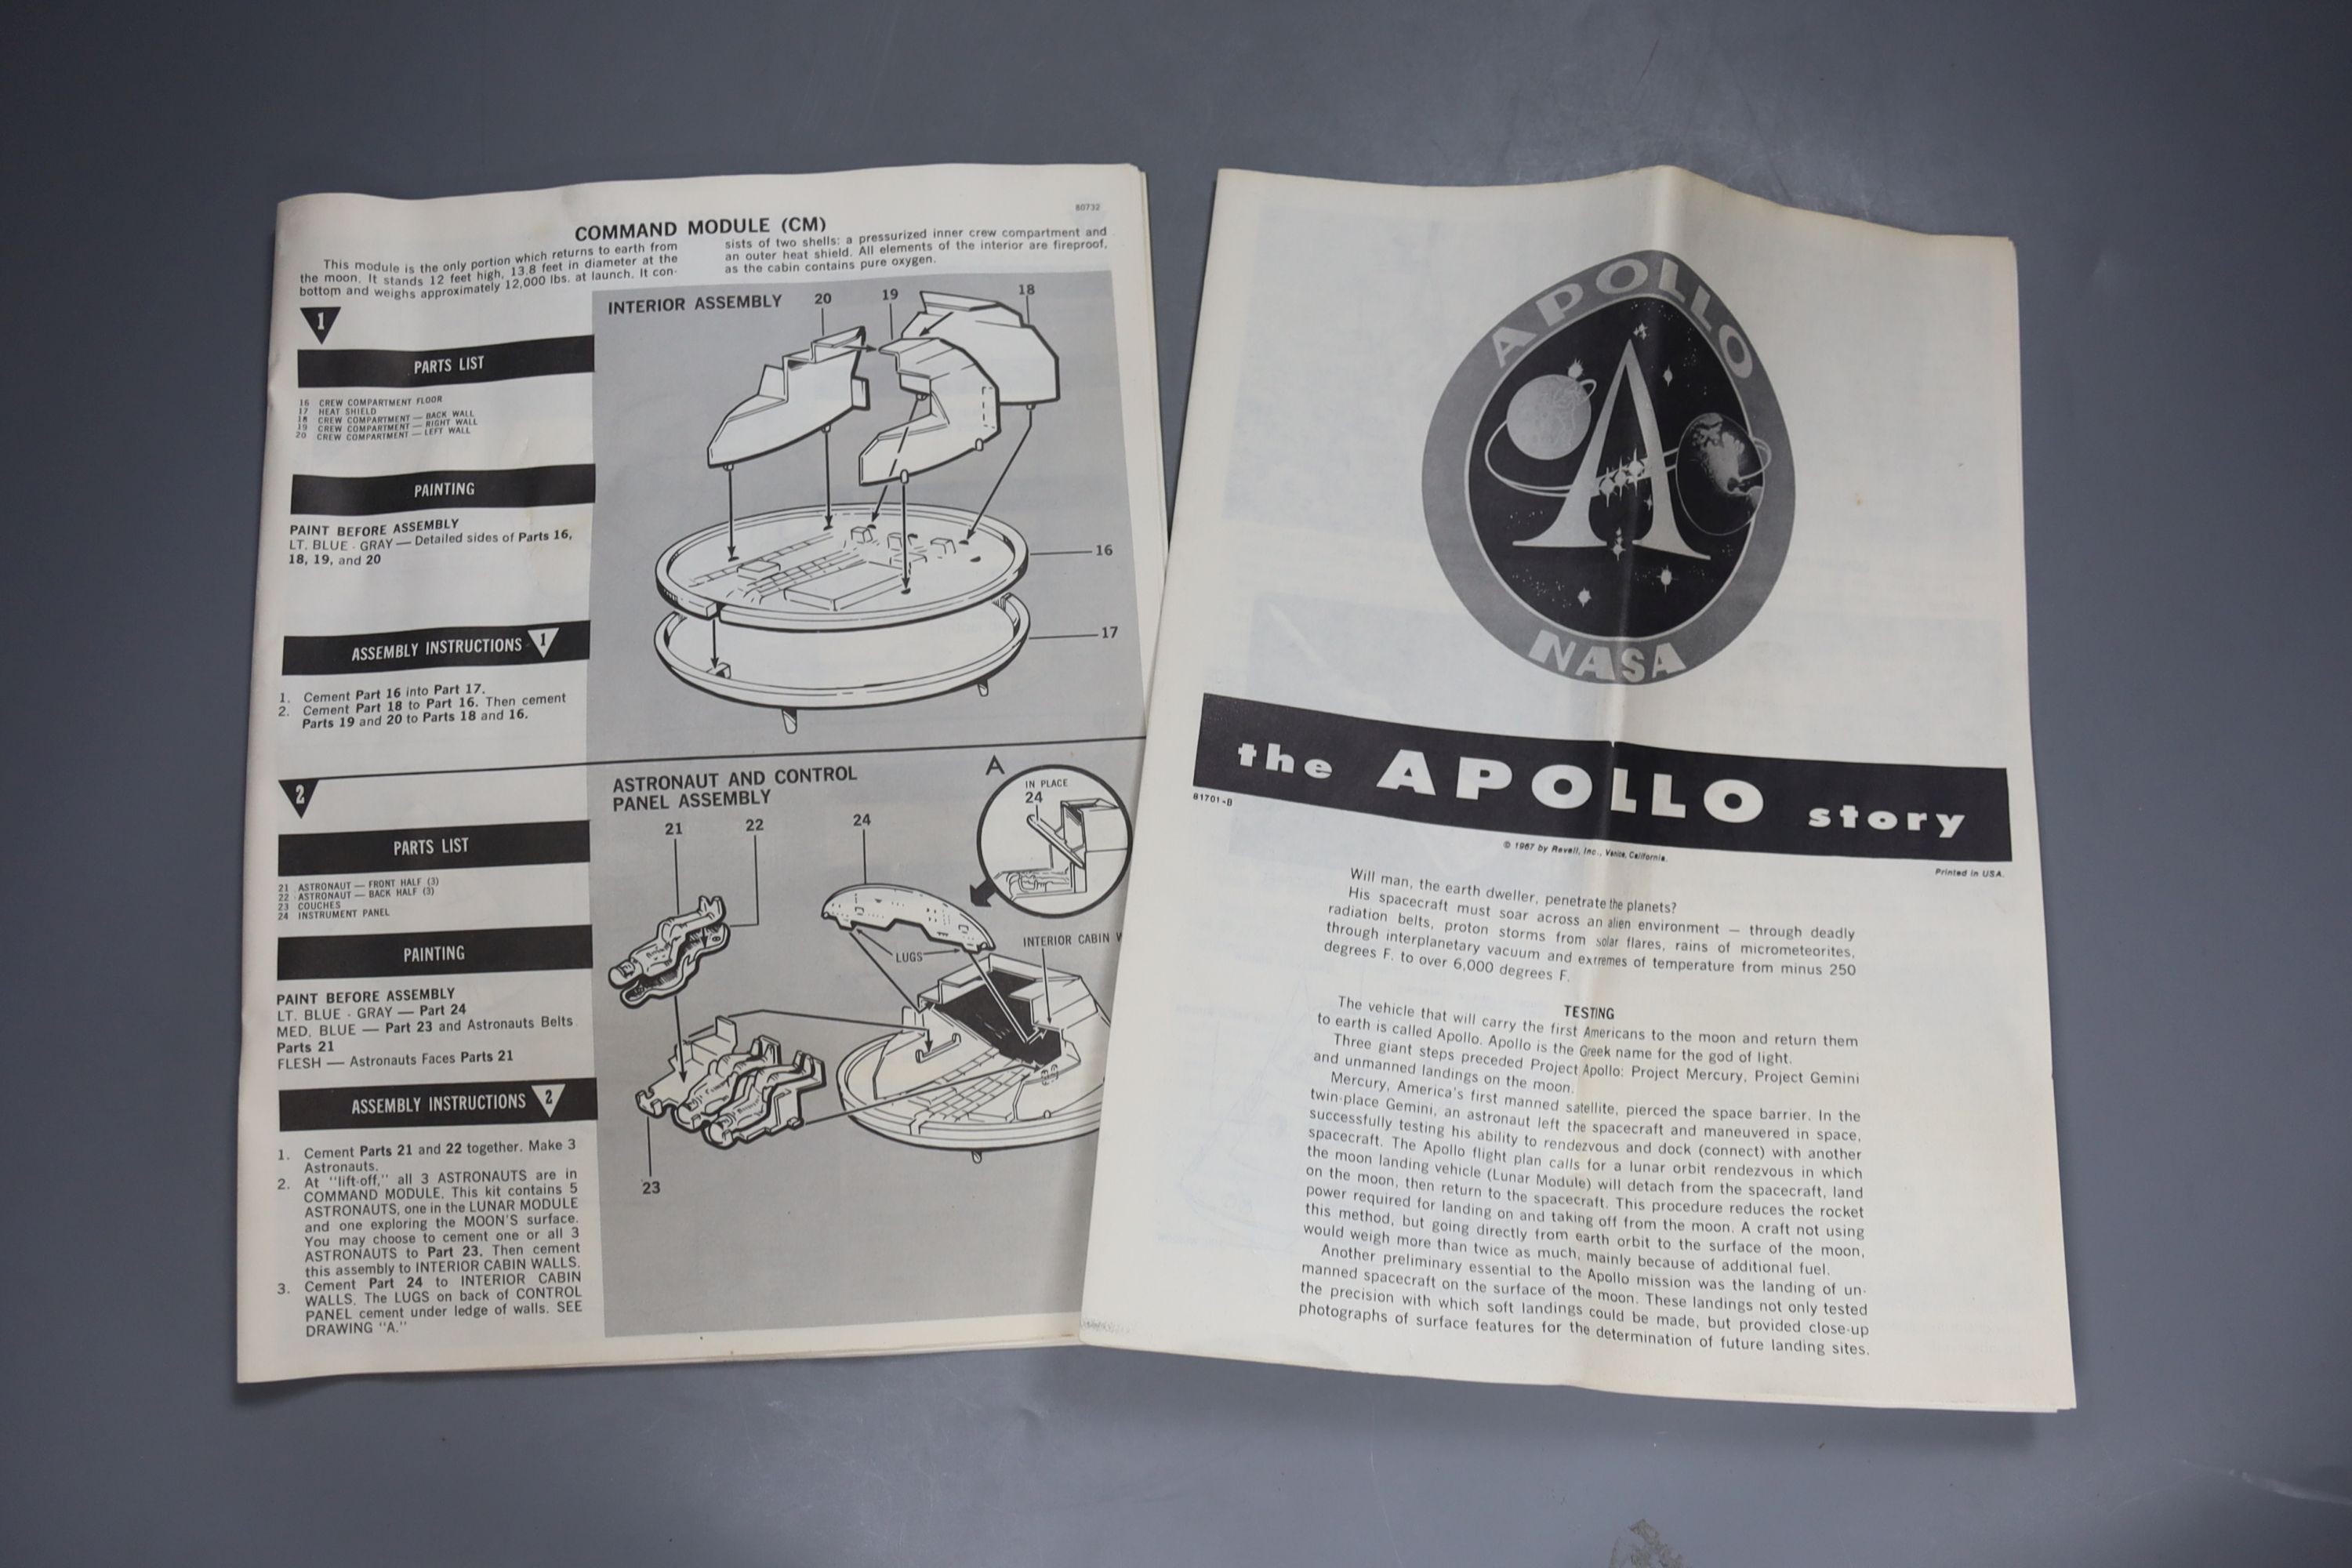 A boxed 1960's Apollo lunar spacecraft scale model kit, by Revell.